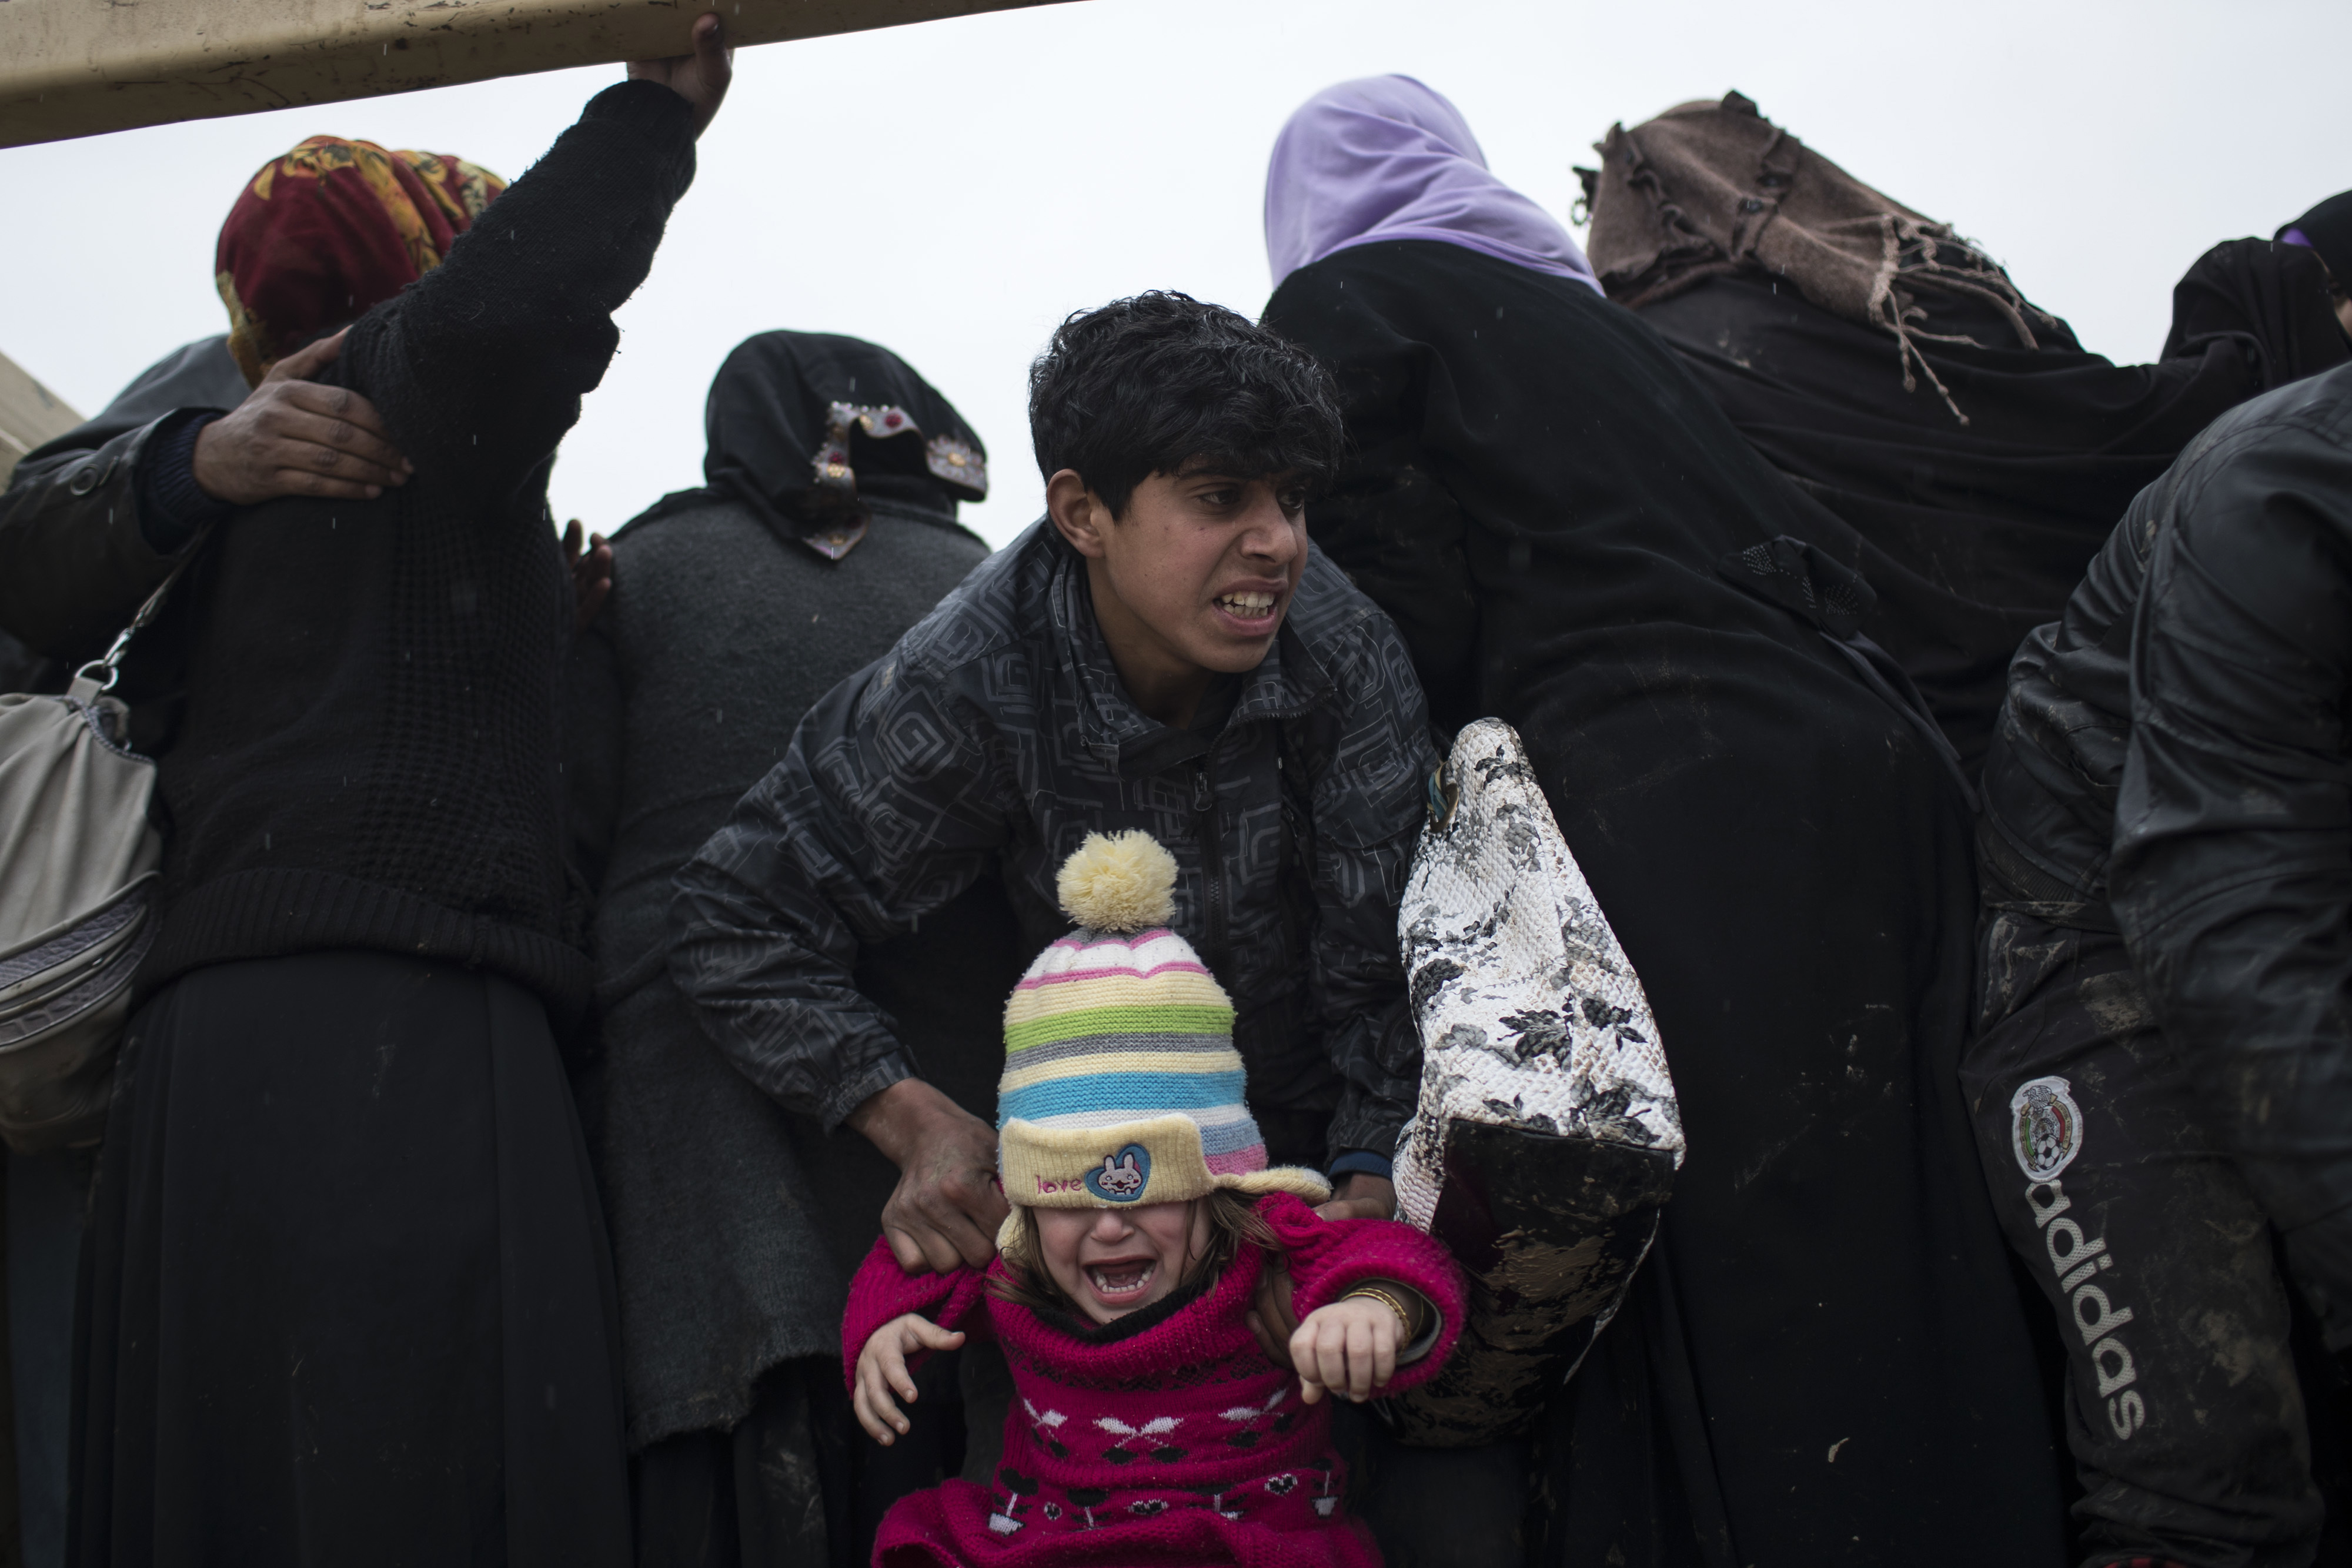 Displaced Iraqis, fleeing fighting between Iraqi security forces and Islamic State militants, are board a truck before being taken to a camp on the western side of Mosul, Iraq, Thursday, March 23, 2017. (AP Photo/Felipe Dana)